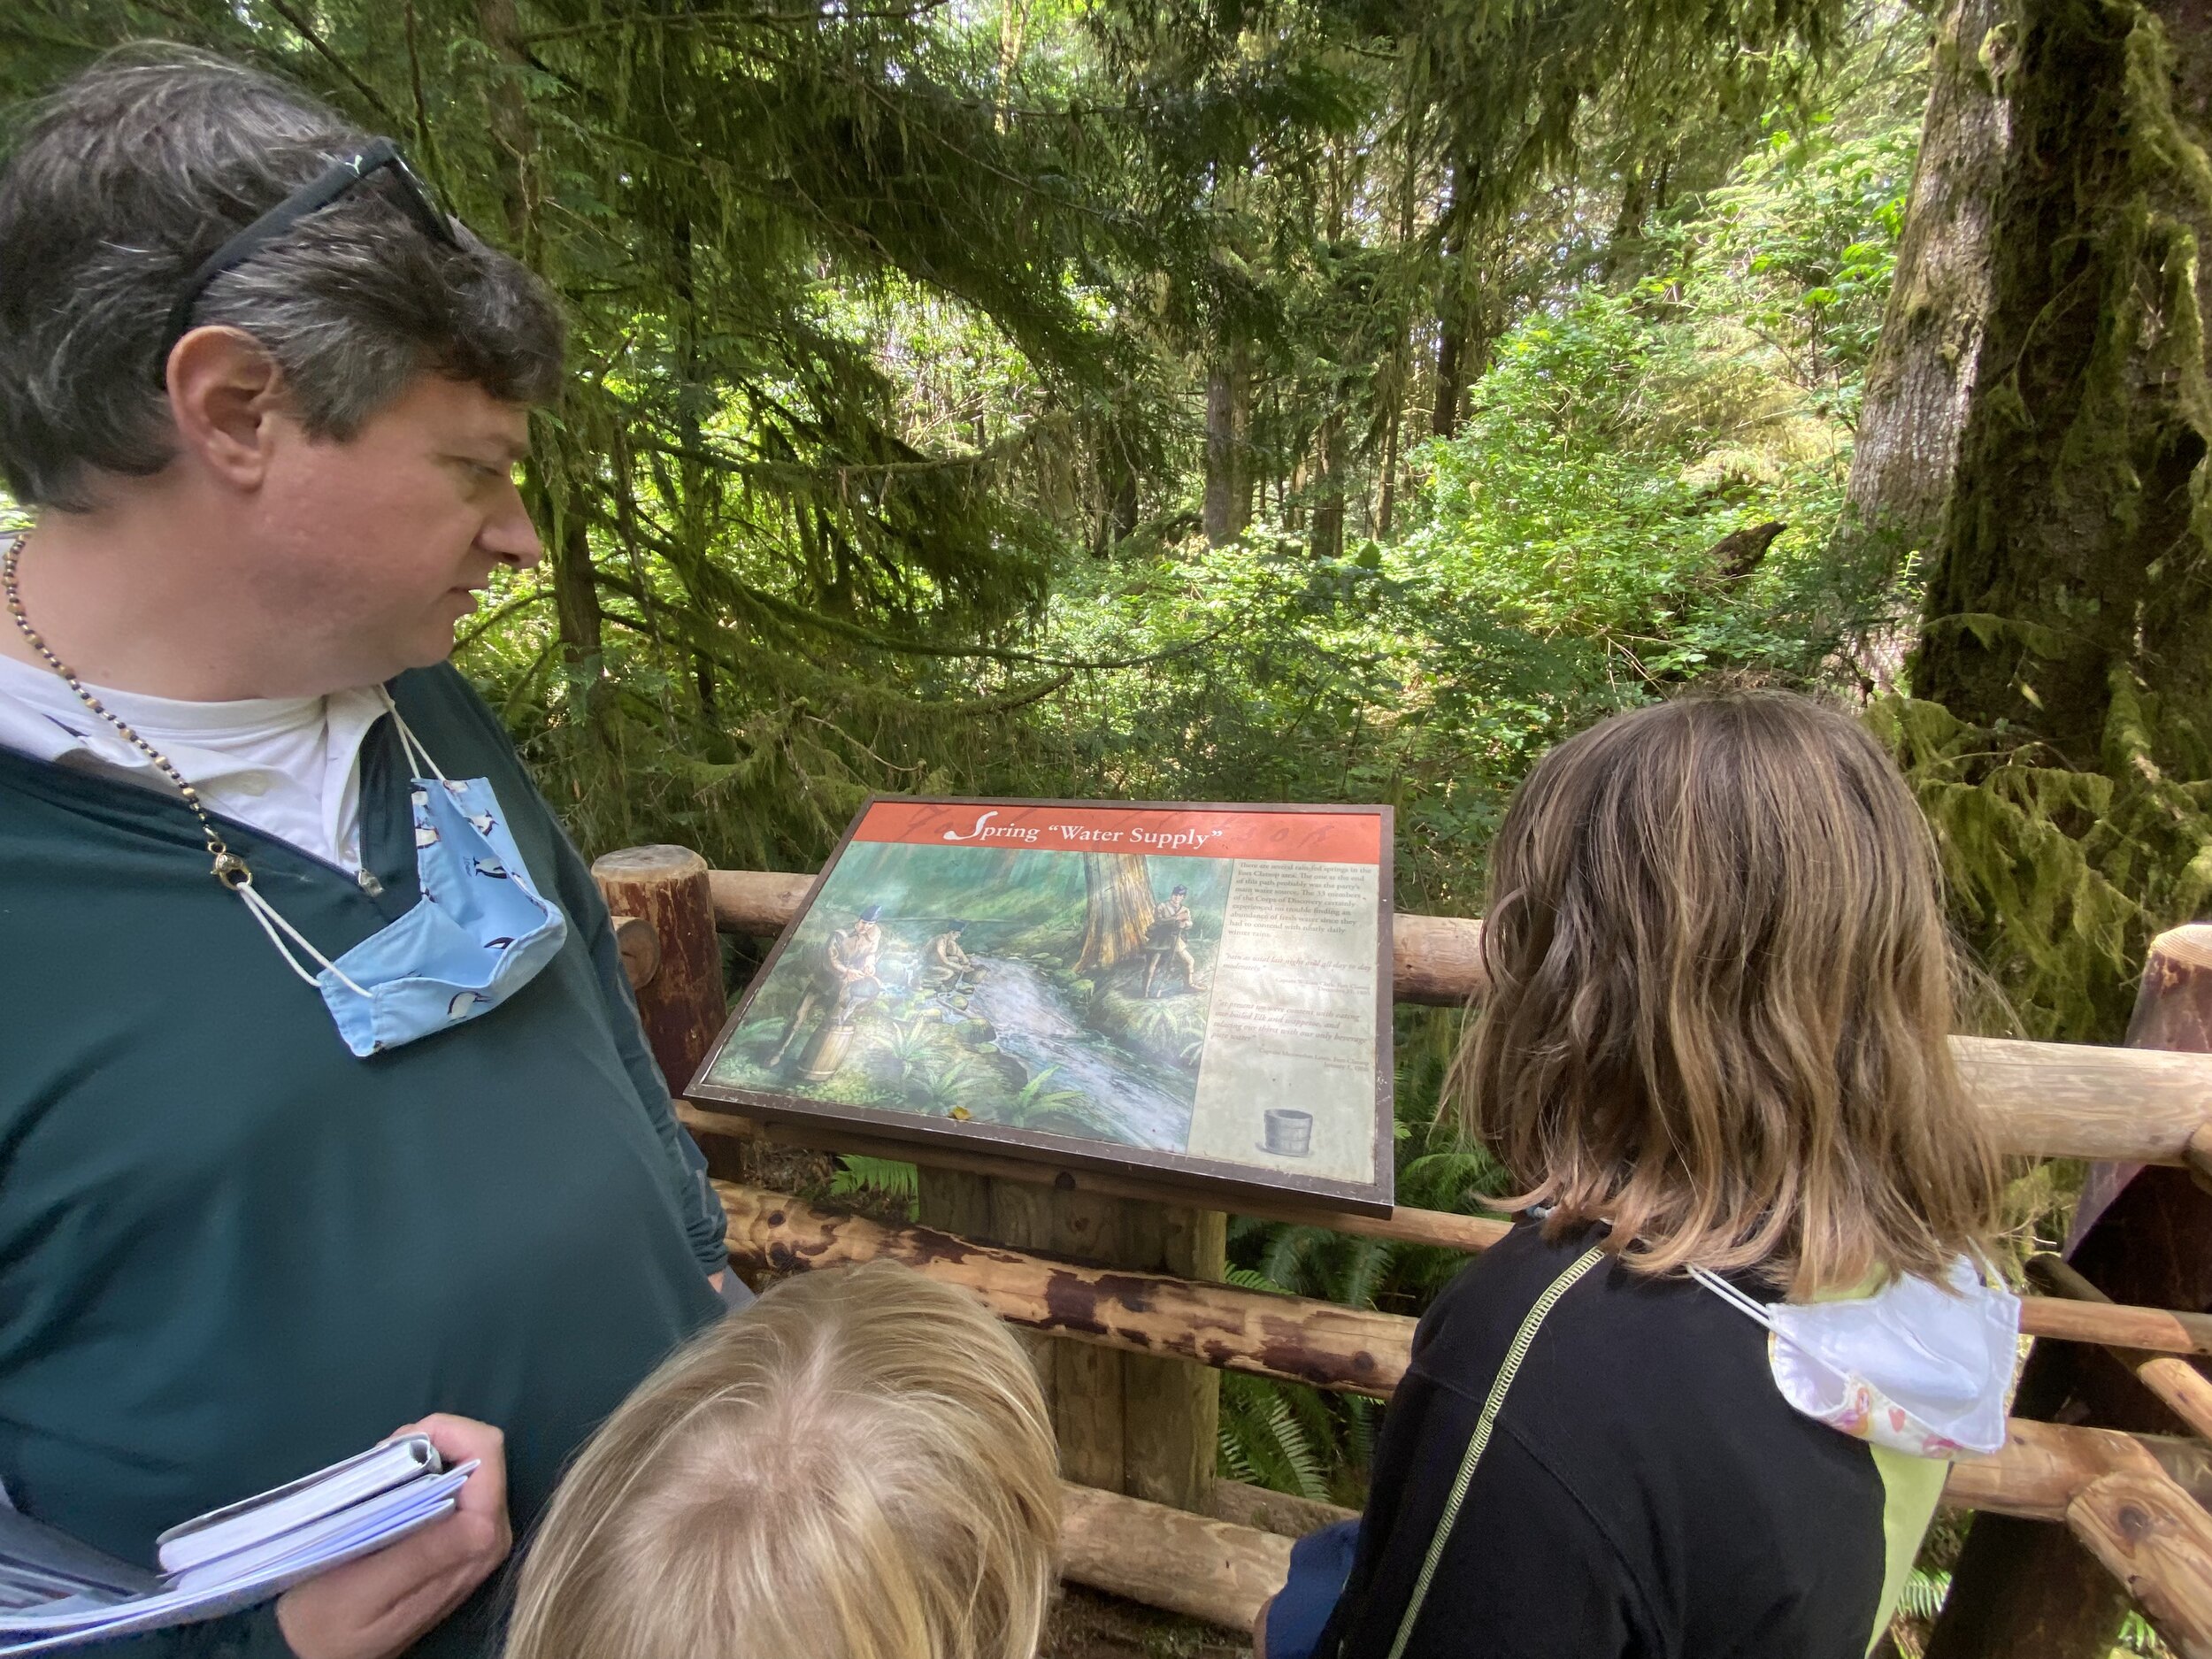 Checking out the Crops’ fresh water supply from Fort Clatsop.  Photo by Karen Boudreaux, June 15, 2021